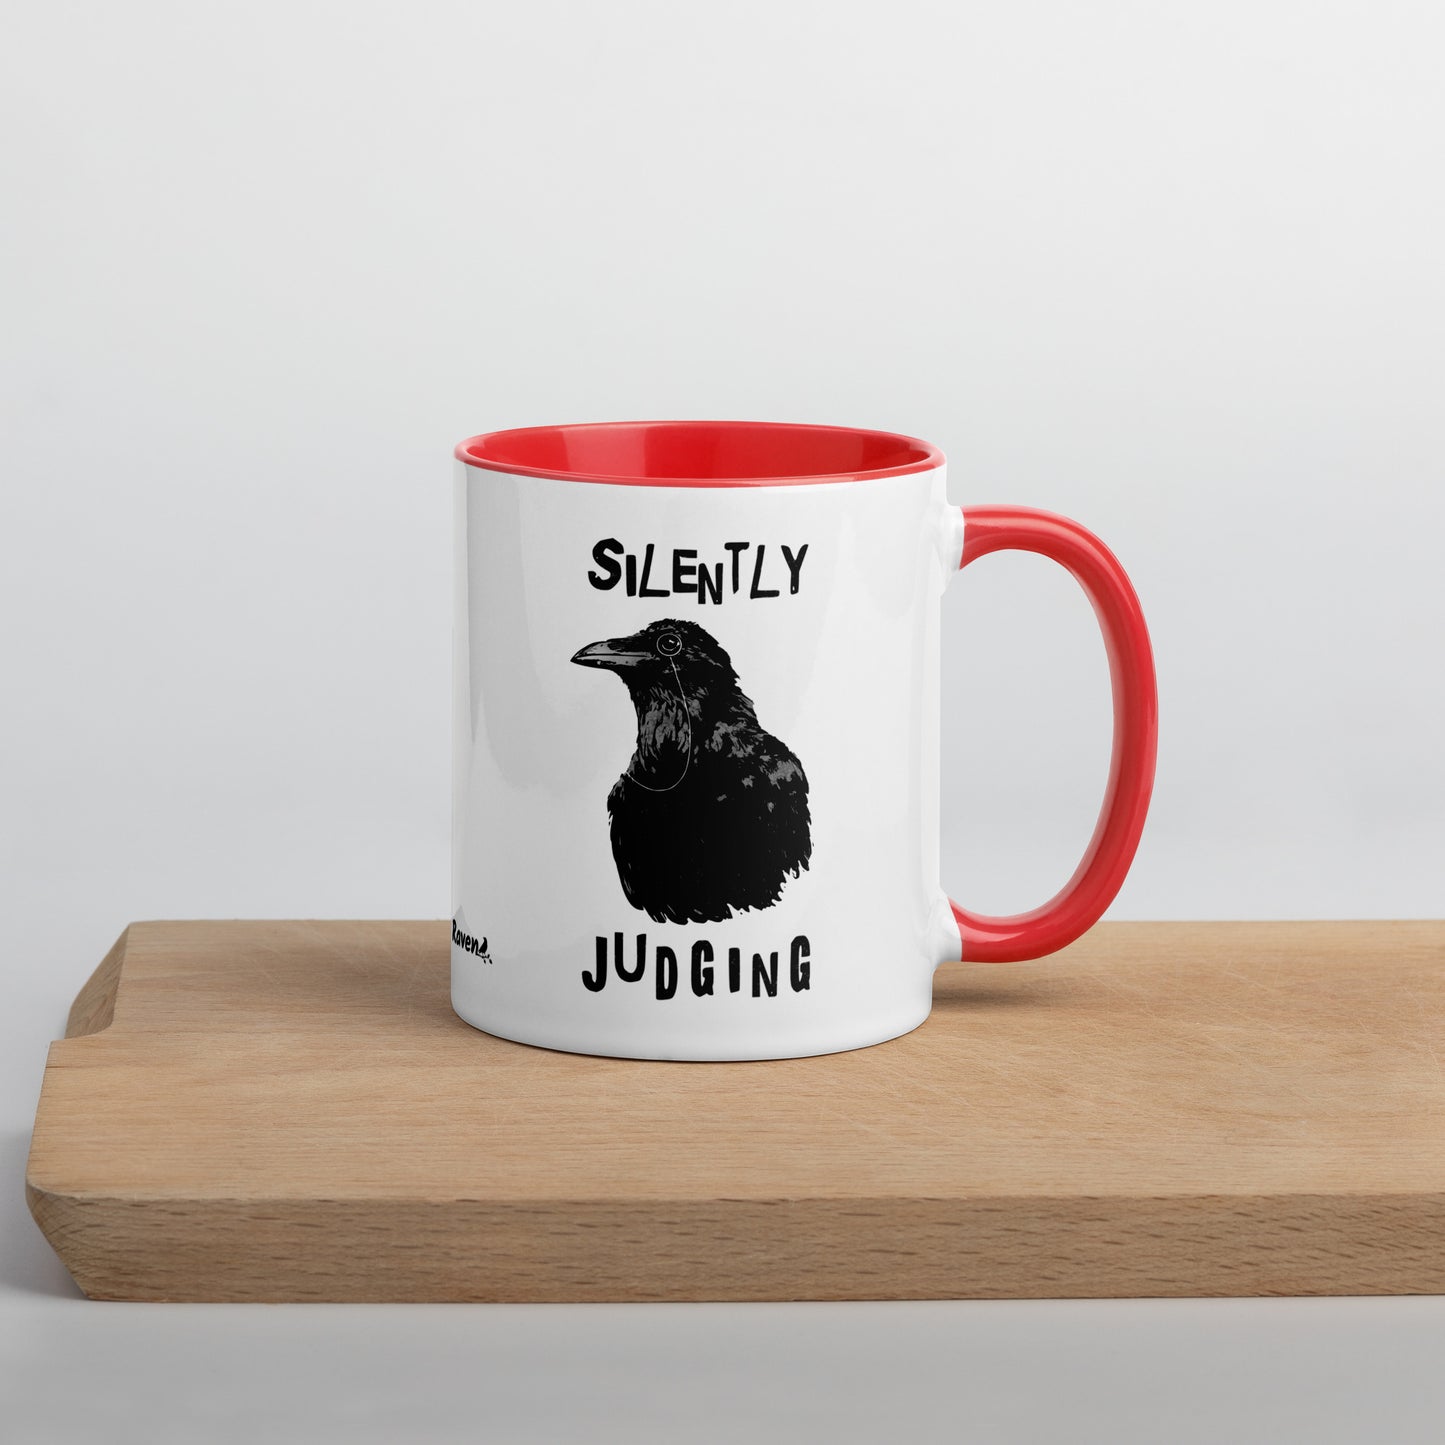 11 ounce ceramic mug with Silently Judging text surrounding a monacle-wearing crow. Double-sided design. Mug has red rim, handle, and inside. Shown sitting on wooden cutting board with handle facing right.